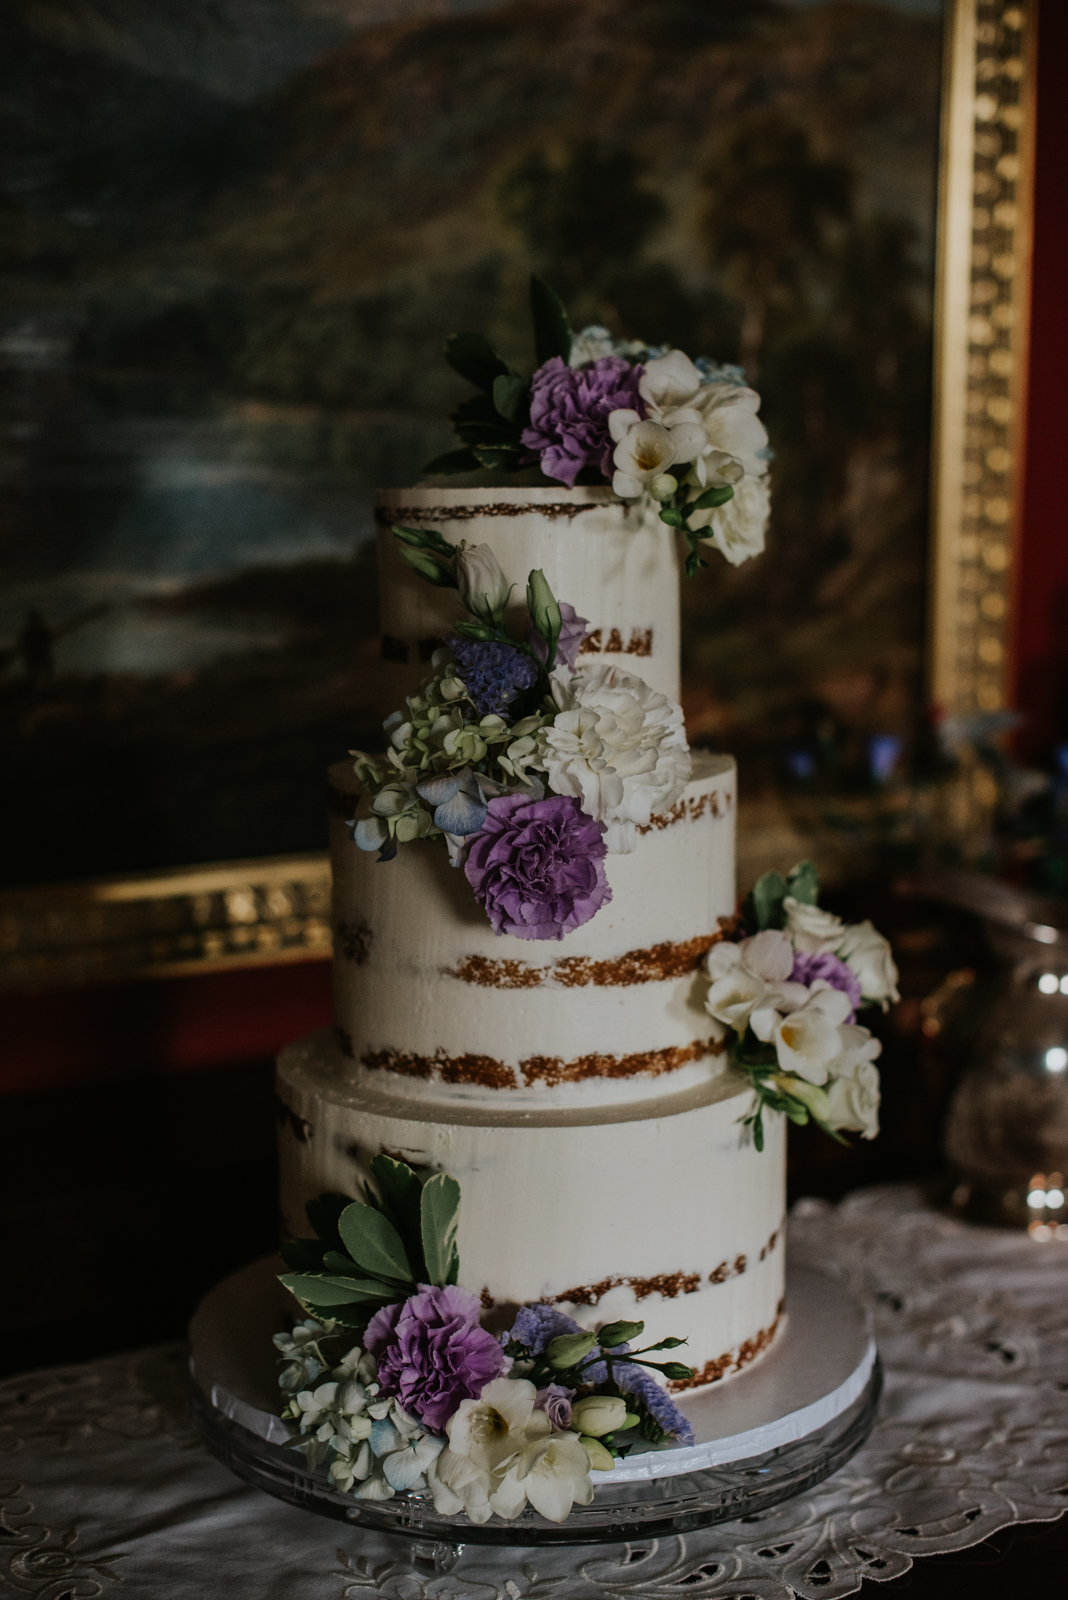 3 tier wedding cake with purple and white flowers